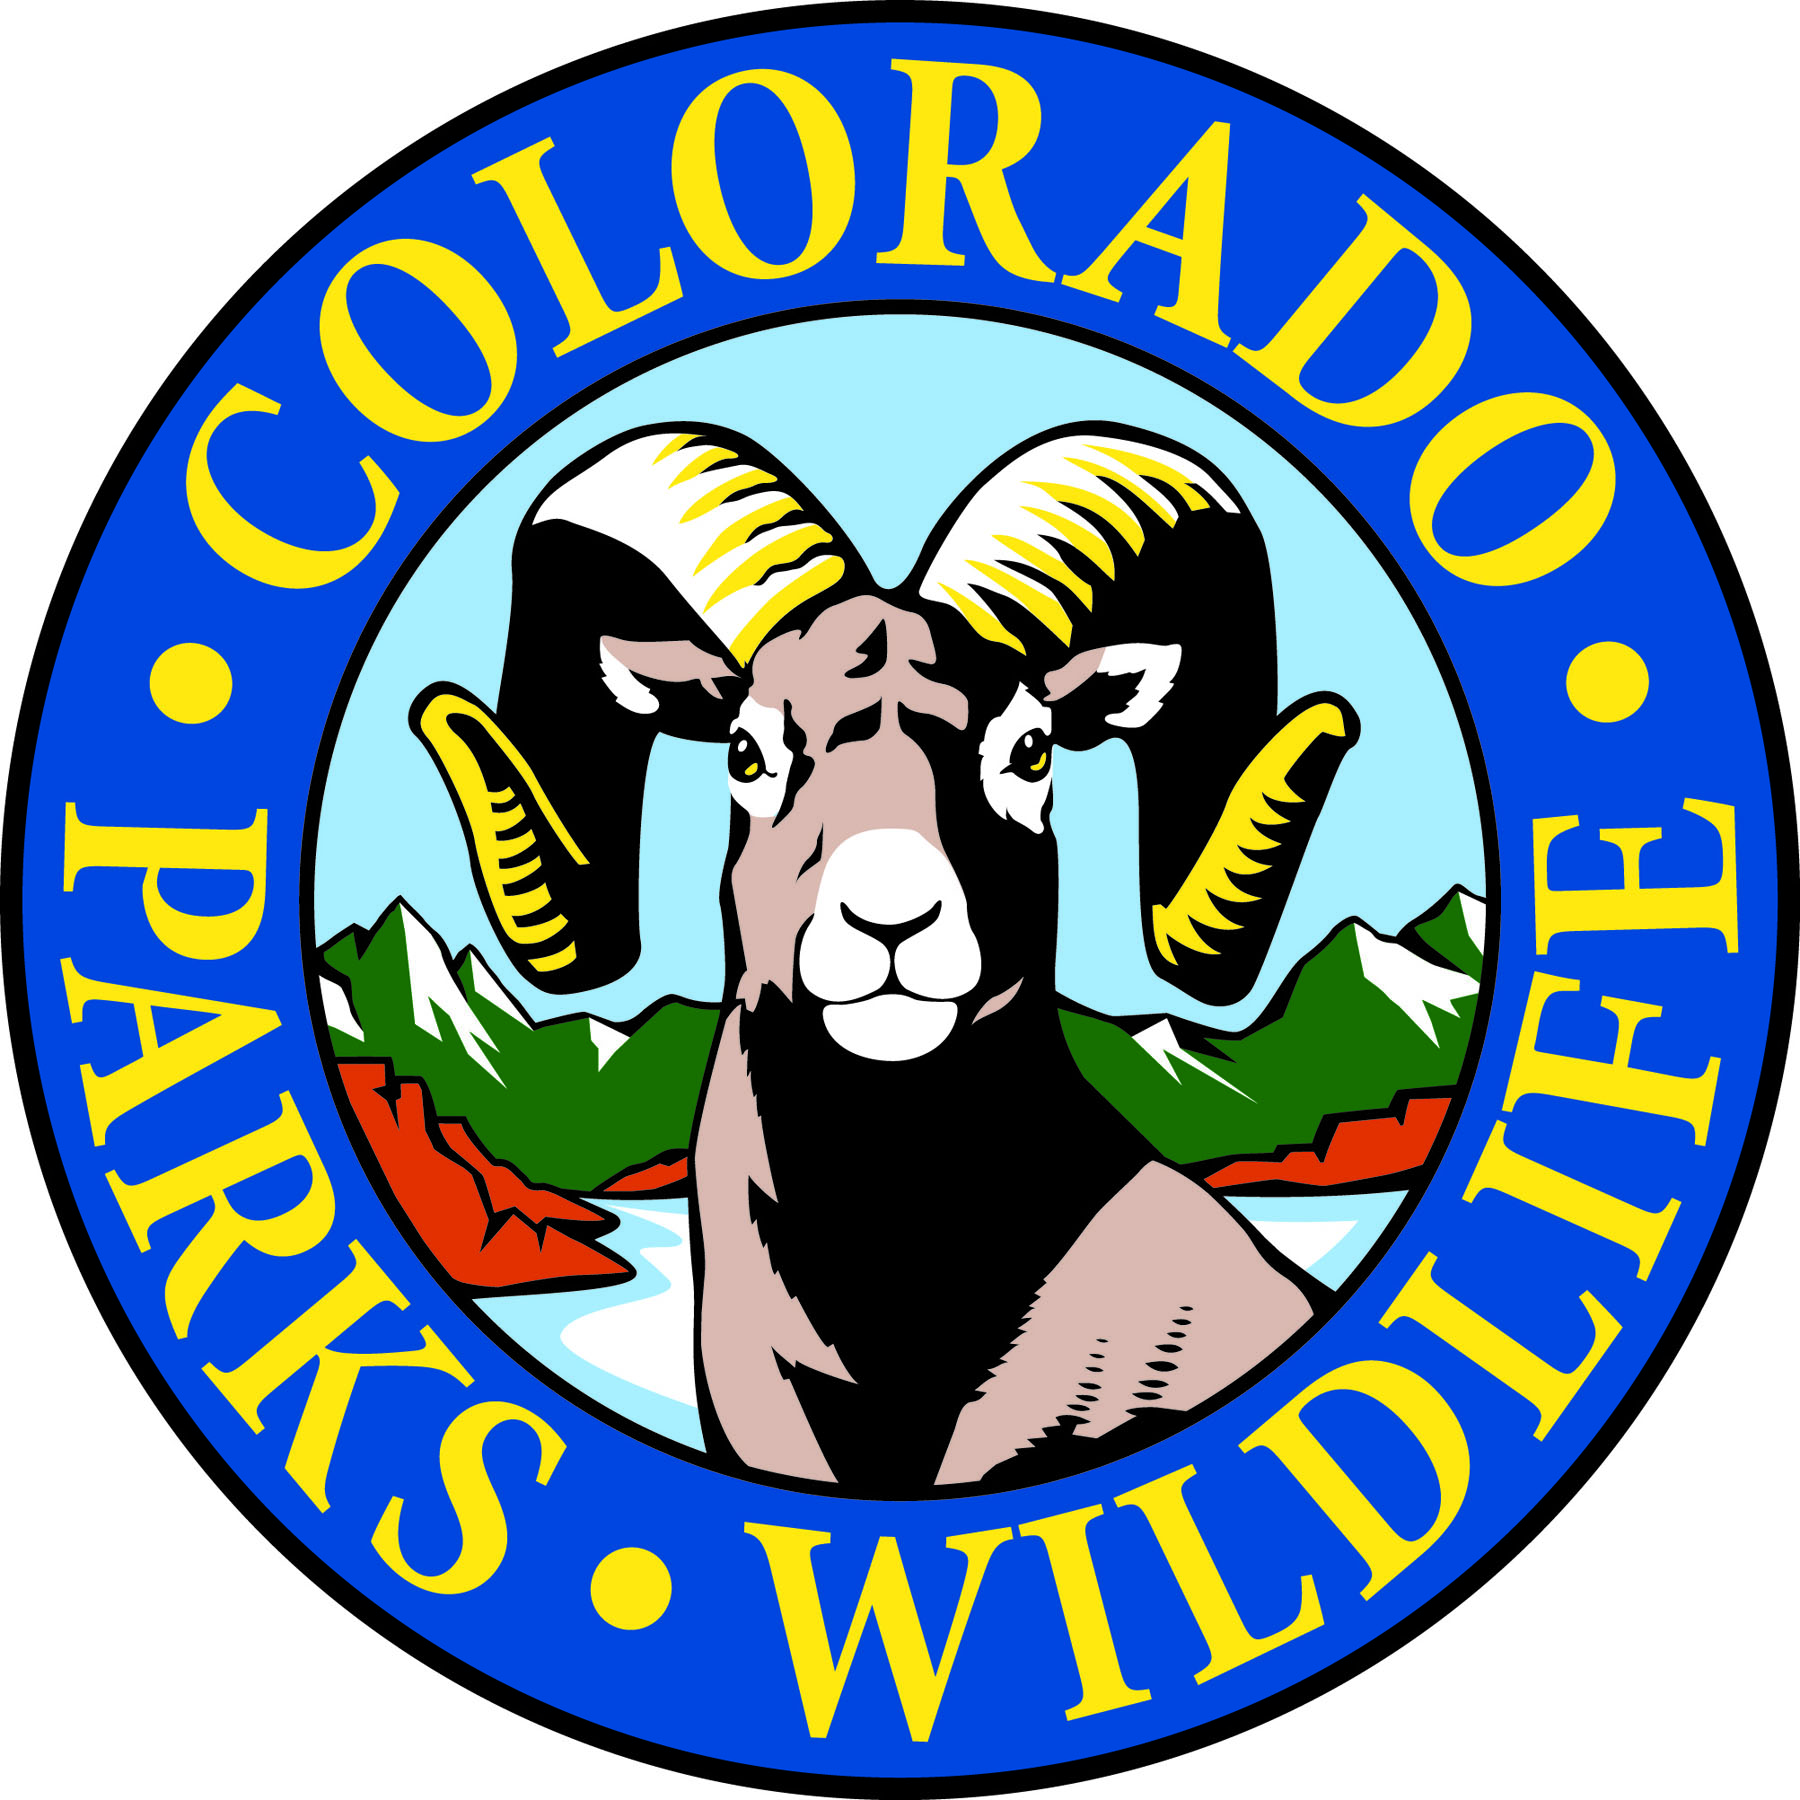 State of Colorado invites applications for  Planning Specialist III